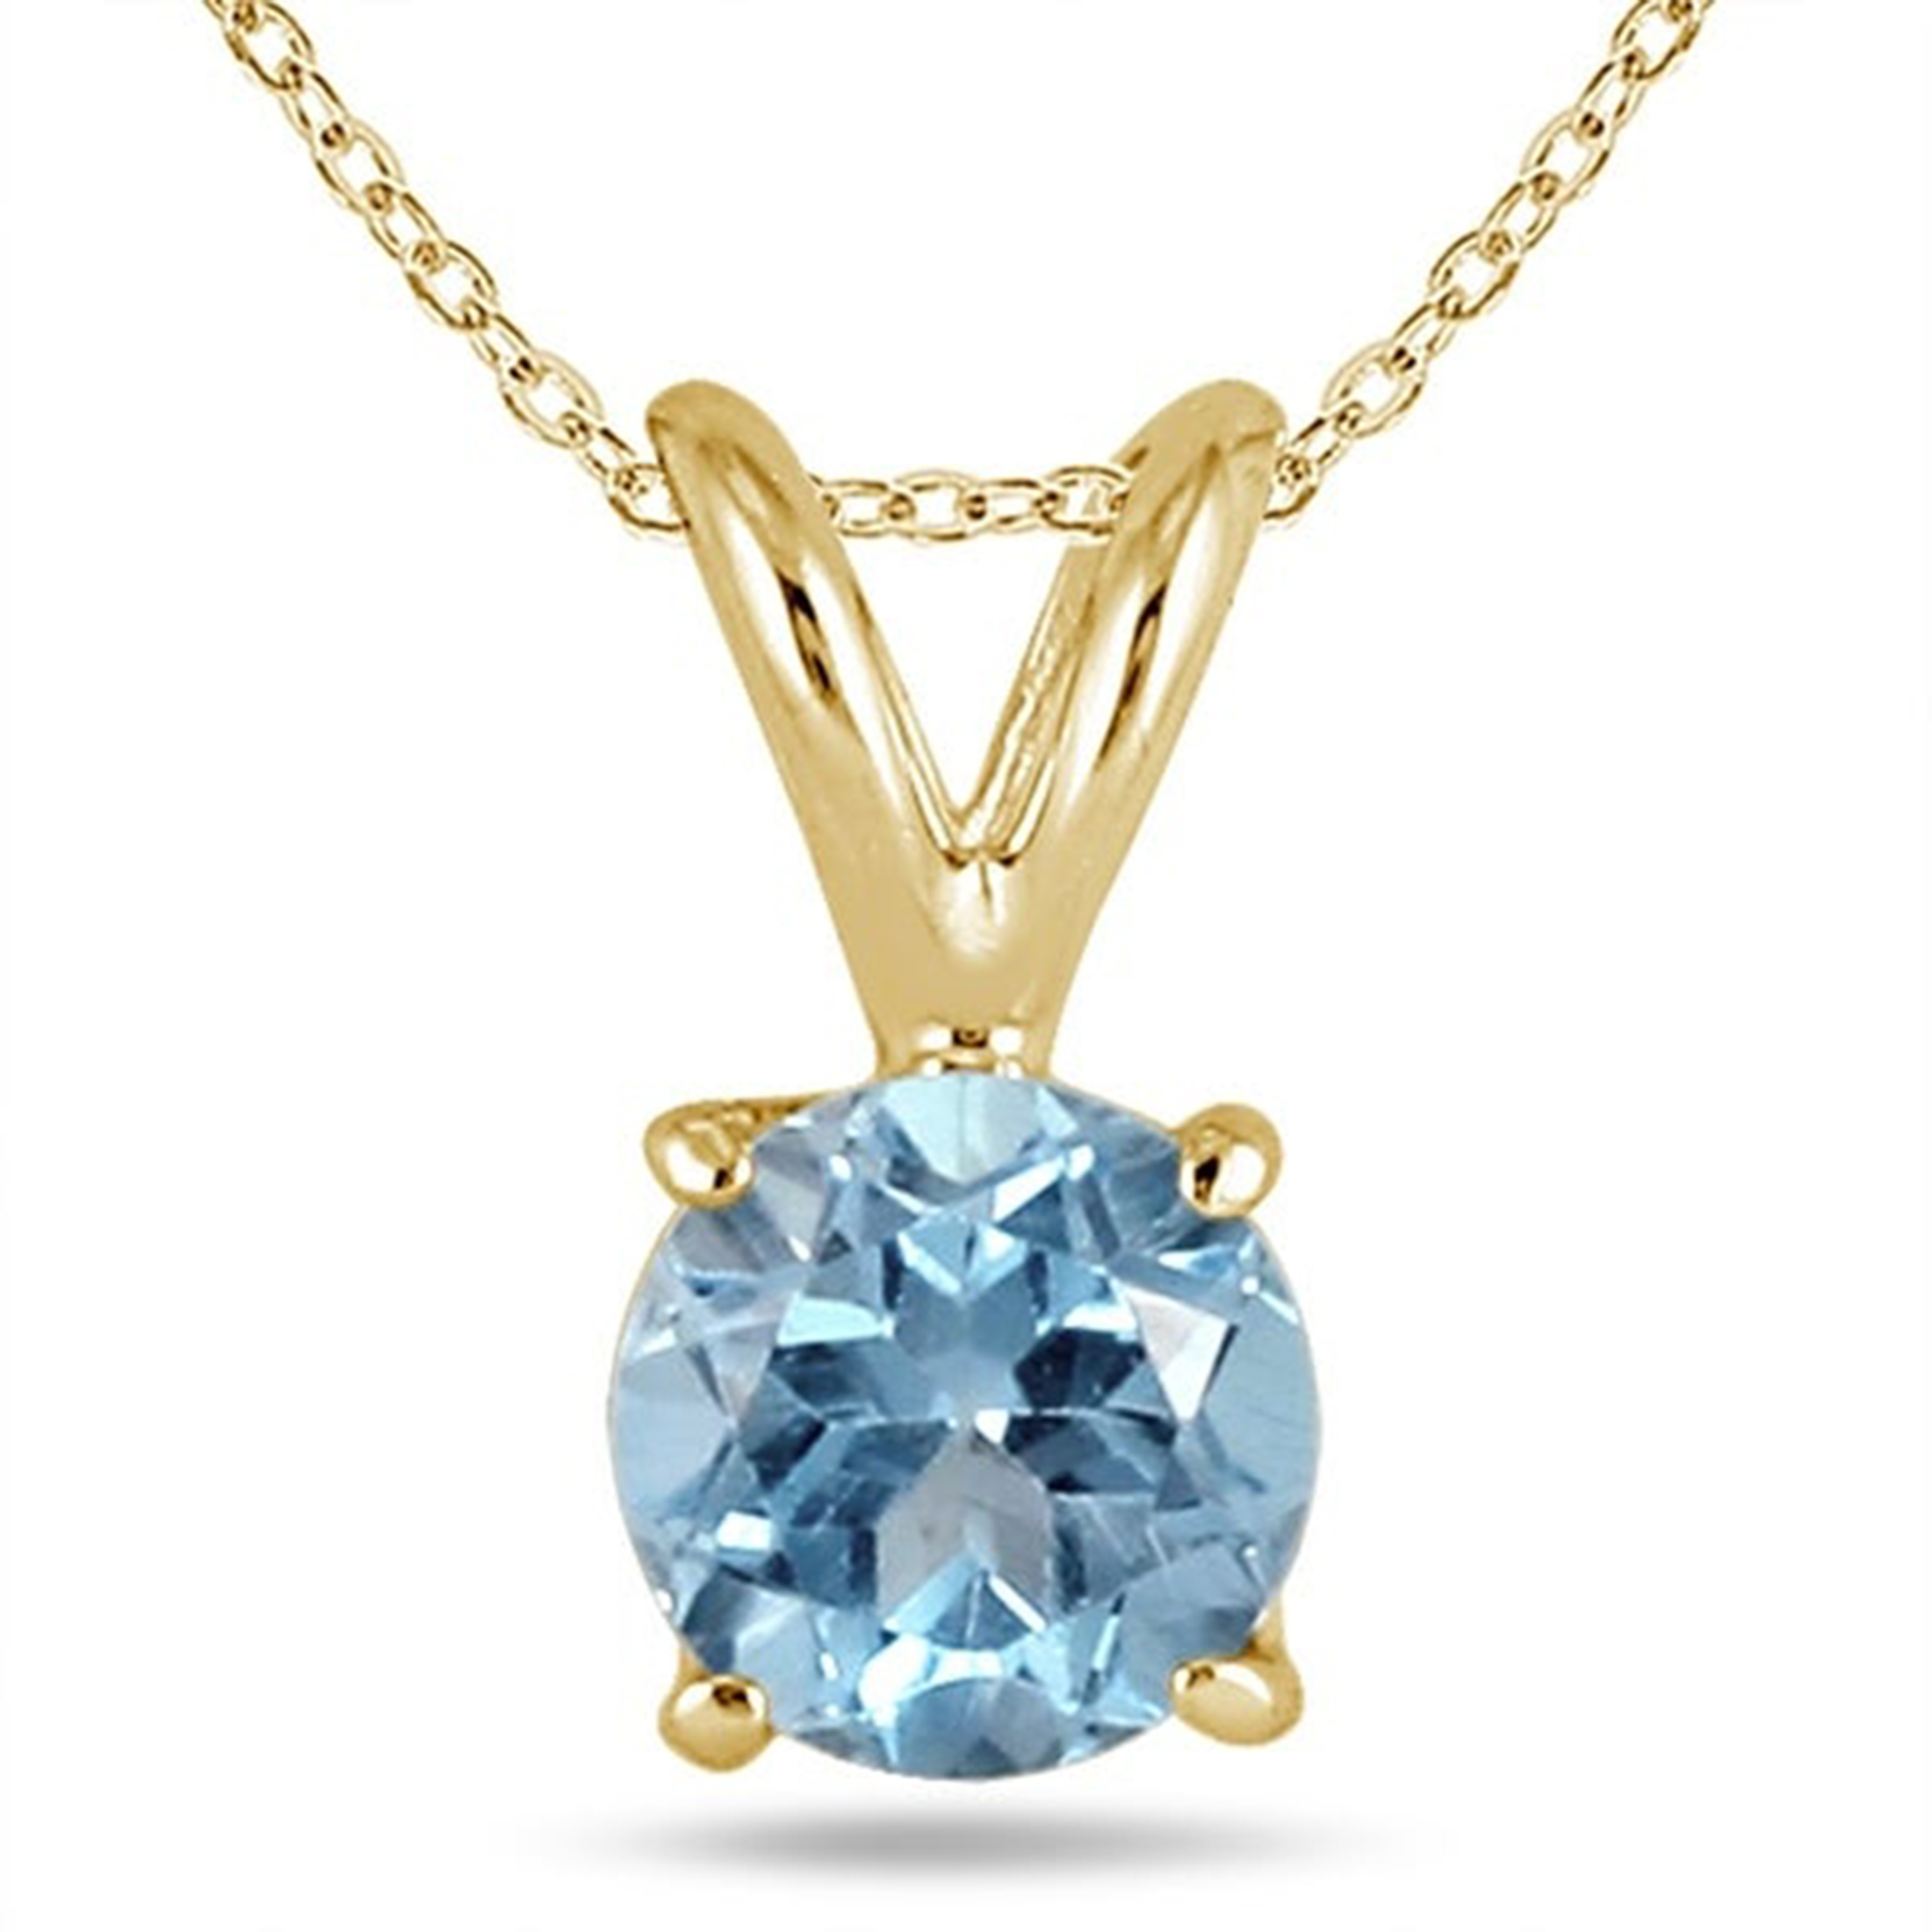 Bonjour Jewelers 14k Solid Yellow Gold 3 Carat Round Aquamarine  18 Inch Necklace Pack Of 2.